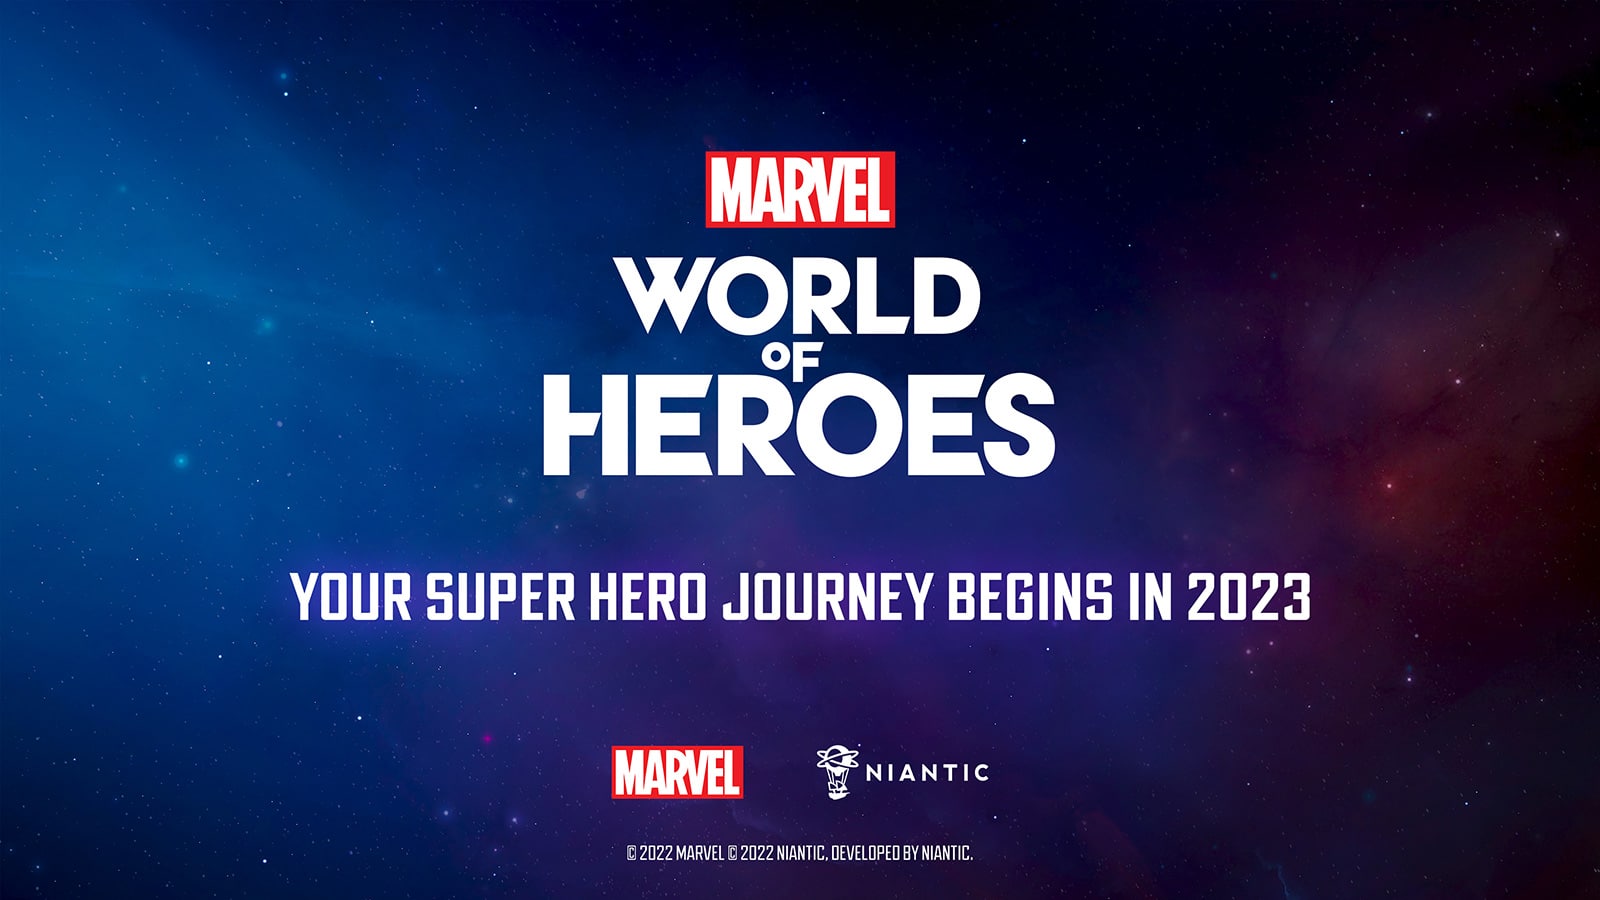 Marvel World of Heroes Announcement